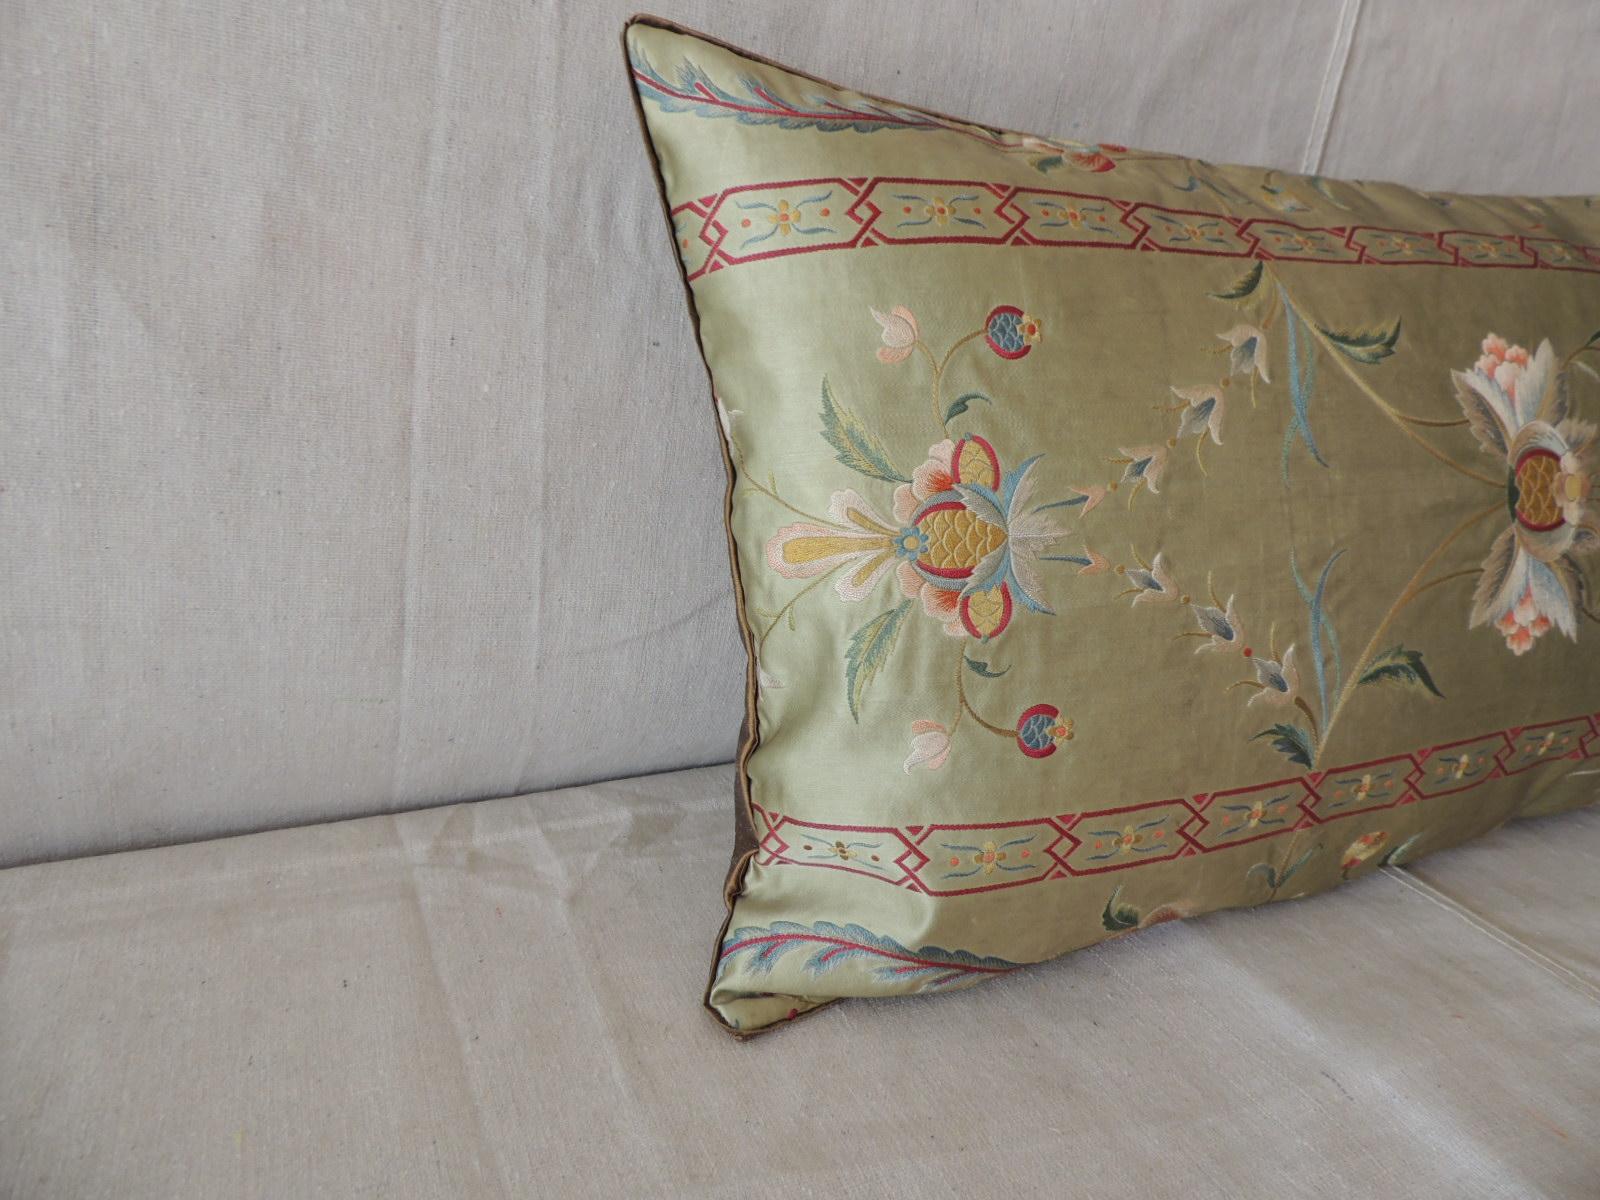 Antique green and red silk embroidered bolster decorative pillow.
This pillow was made from an Italian Chasuble panel.
Small custom ATG golden silk trim all around and same silk backing.
Decorative pillow handcrafted and designed in the